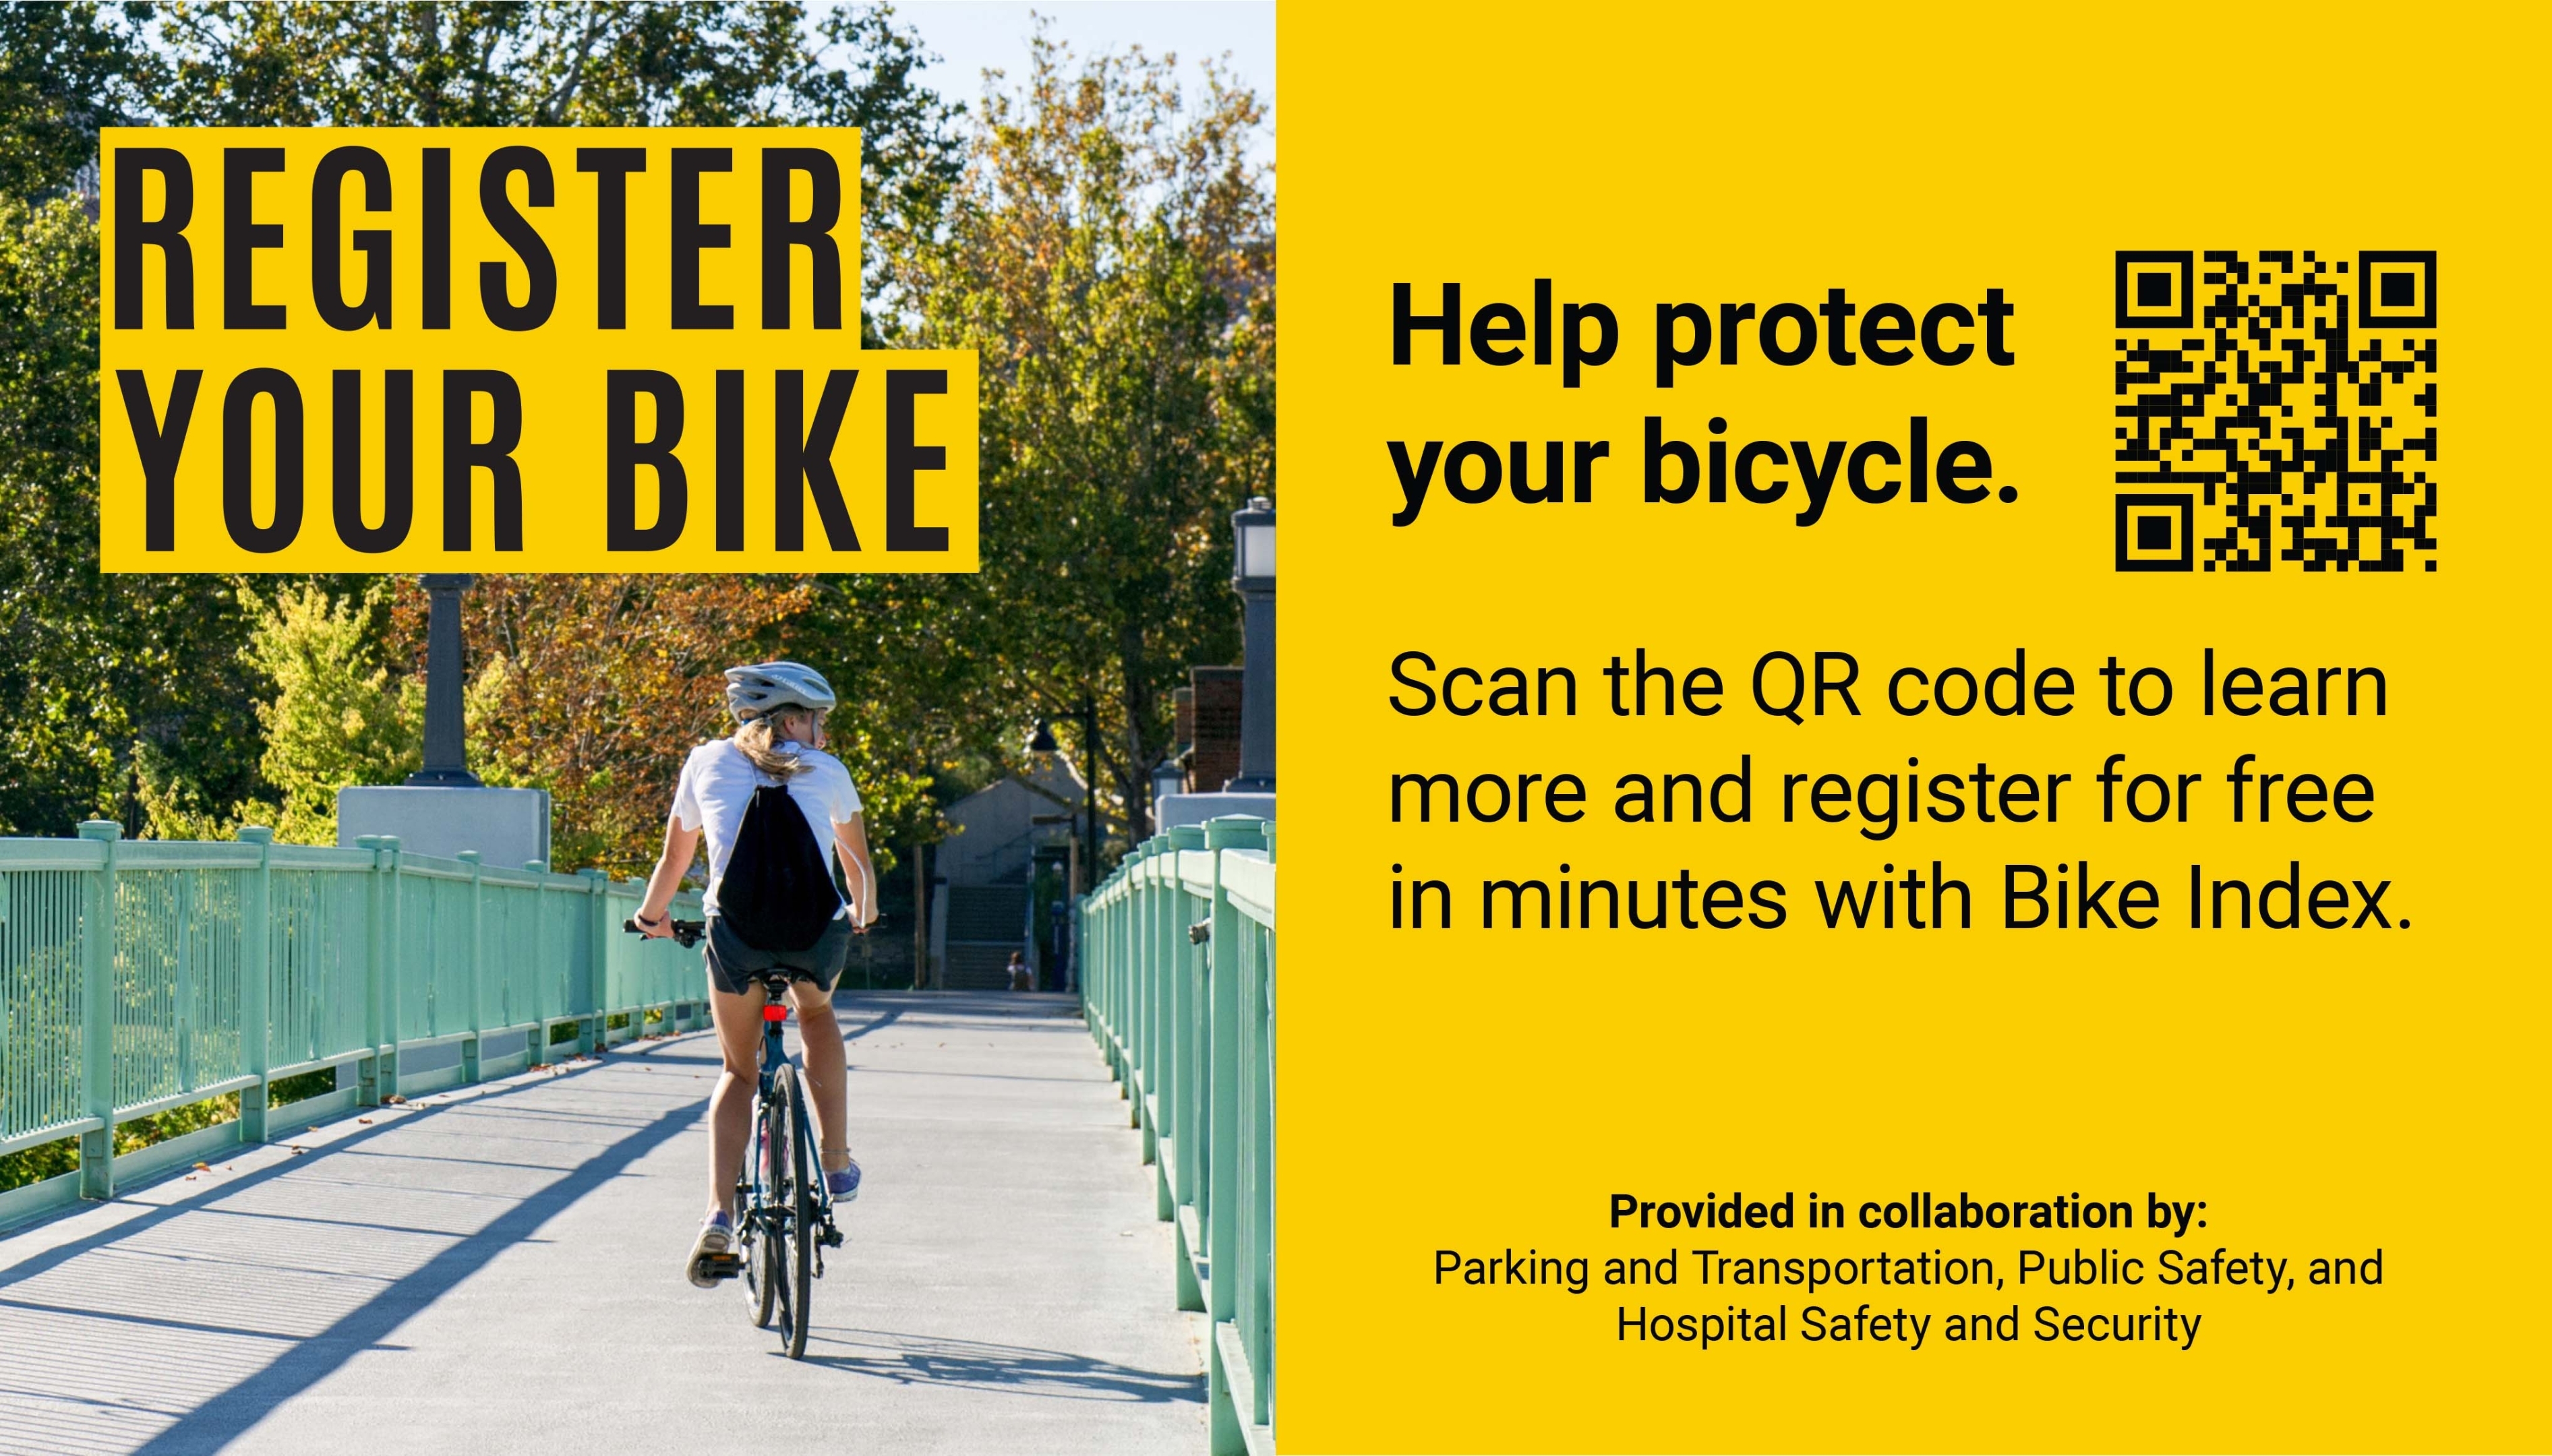 Help protect your bicycle. Register with Bike Index.